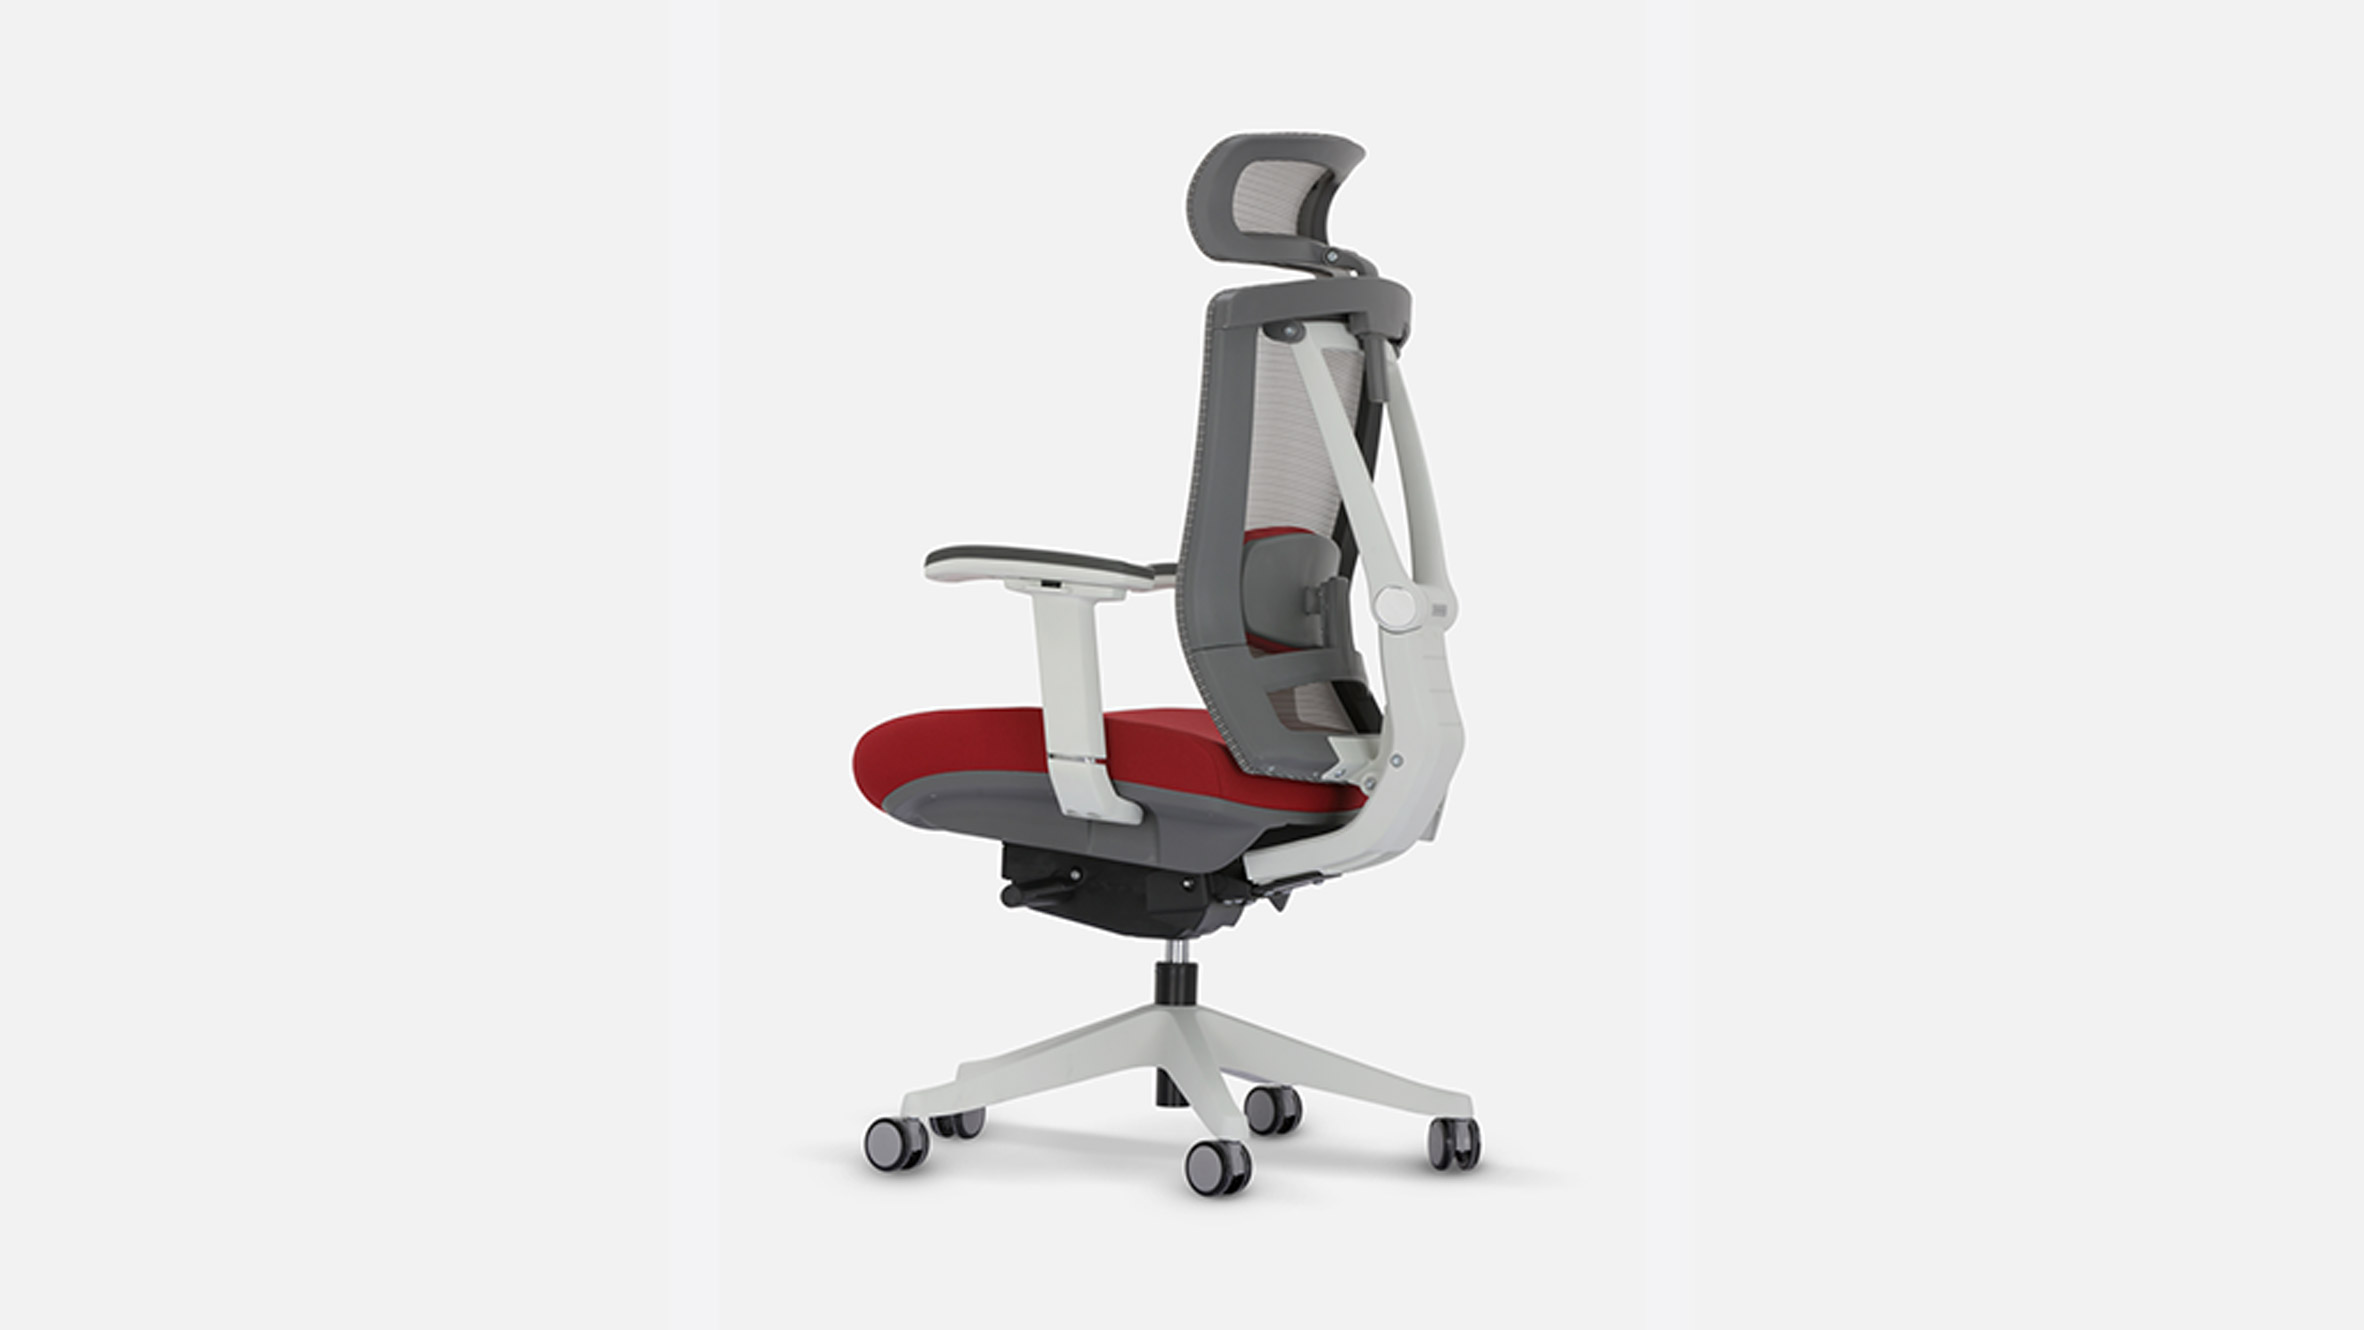 Ergonomic chair with red seat